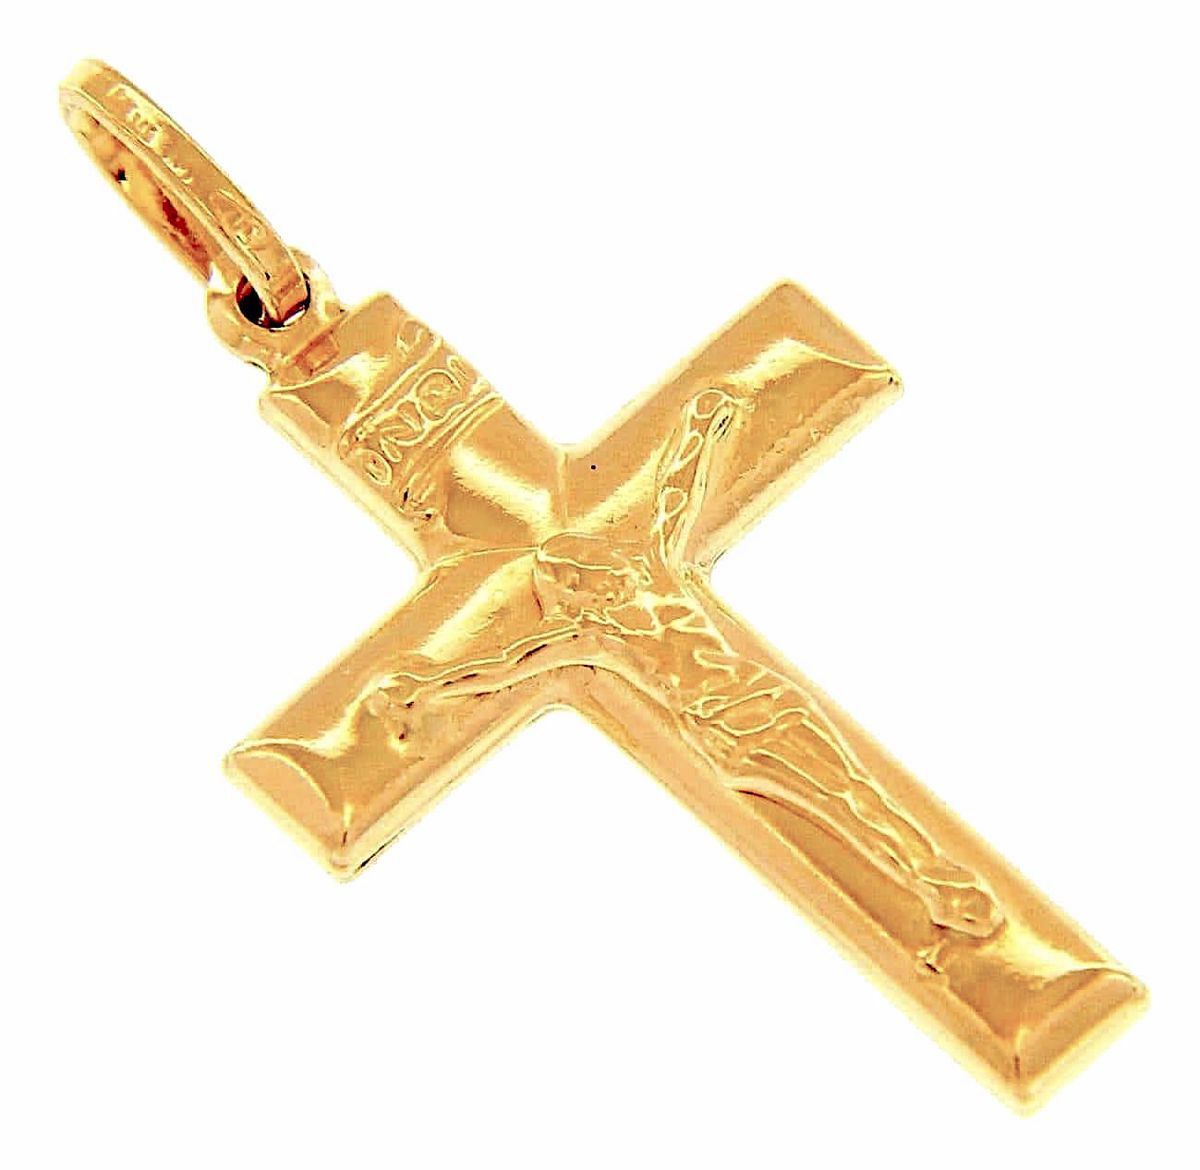 Straight Cross with Body of Christ and INRI Pendant gr 1,9 Yellow Gold ...